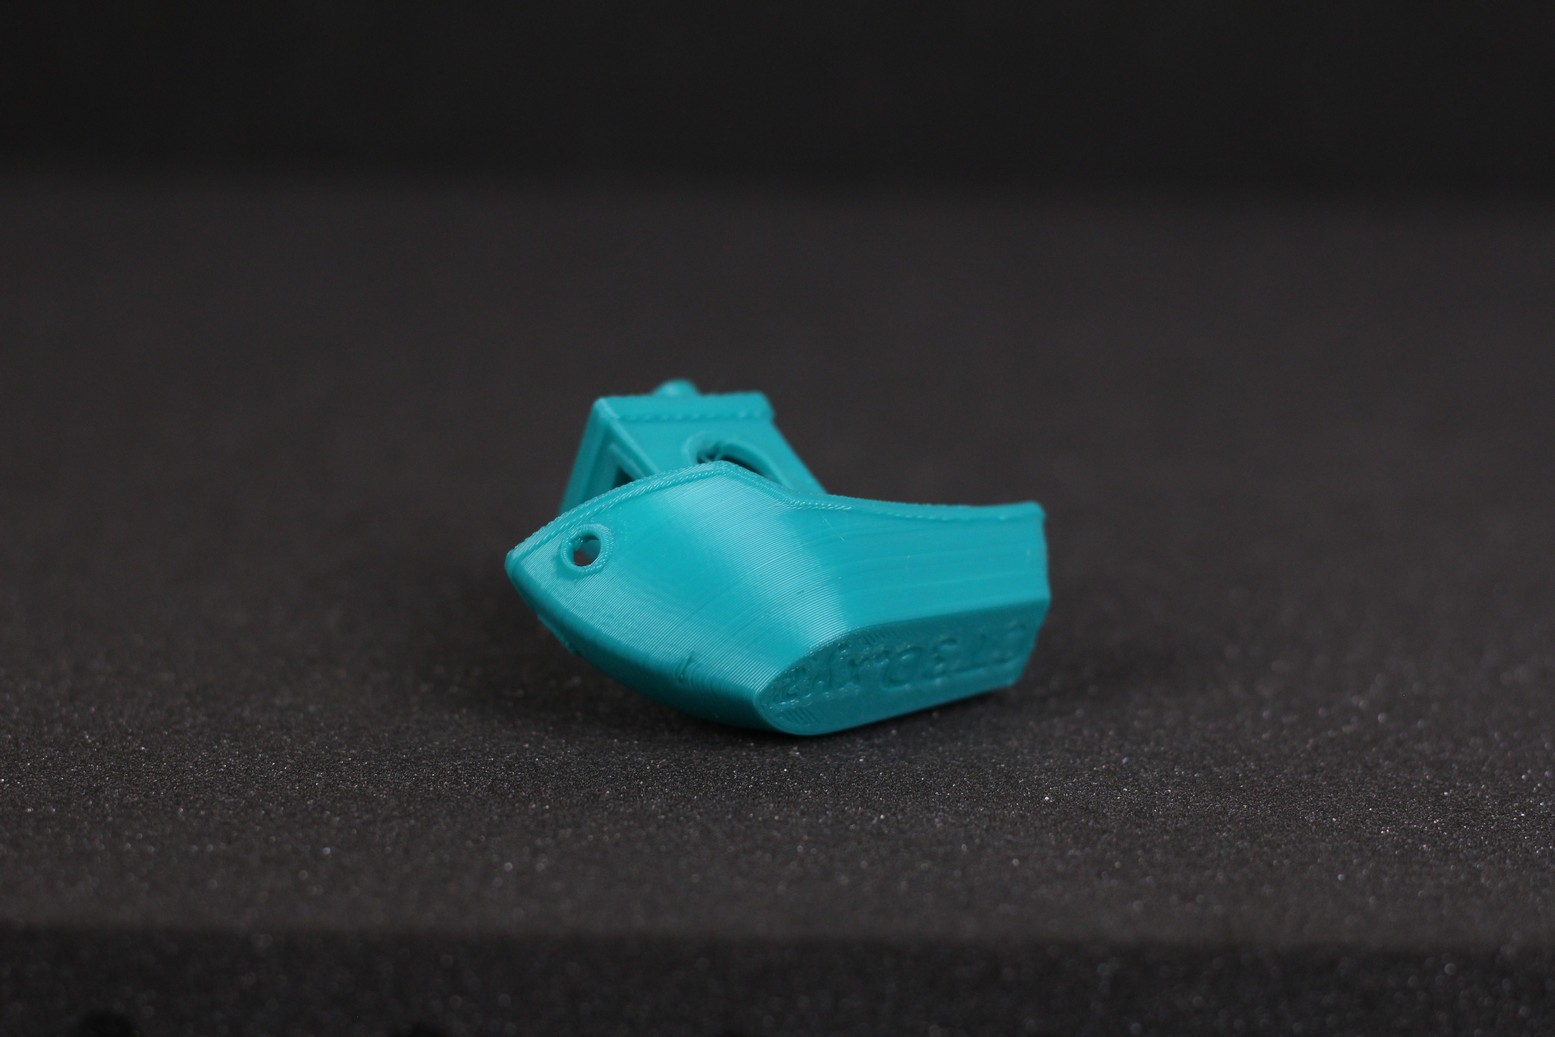 Ender 2 Pro 3D Benchy 5 | Creality Ender 2 Pro Review: Is it worth it?